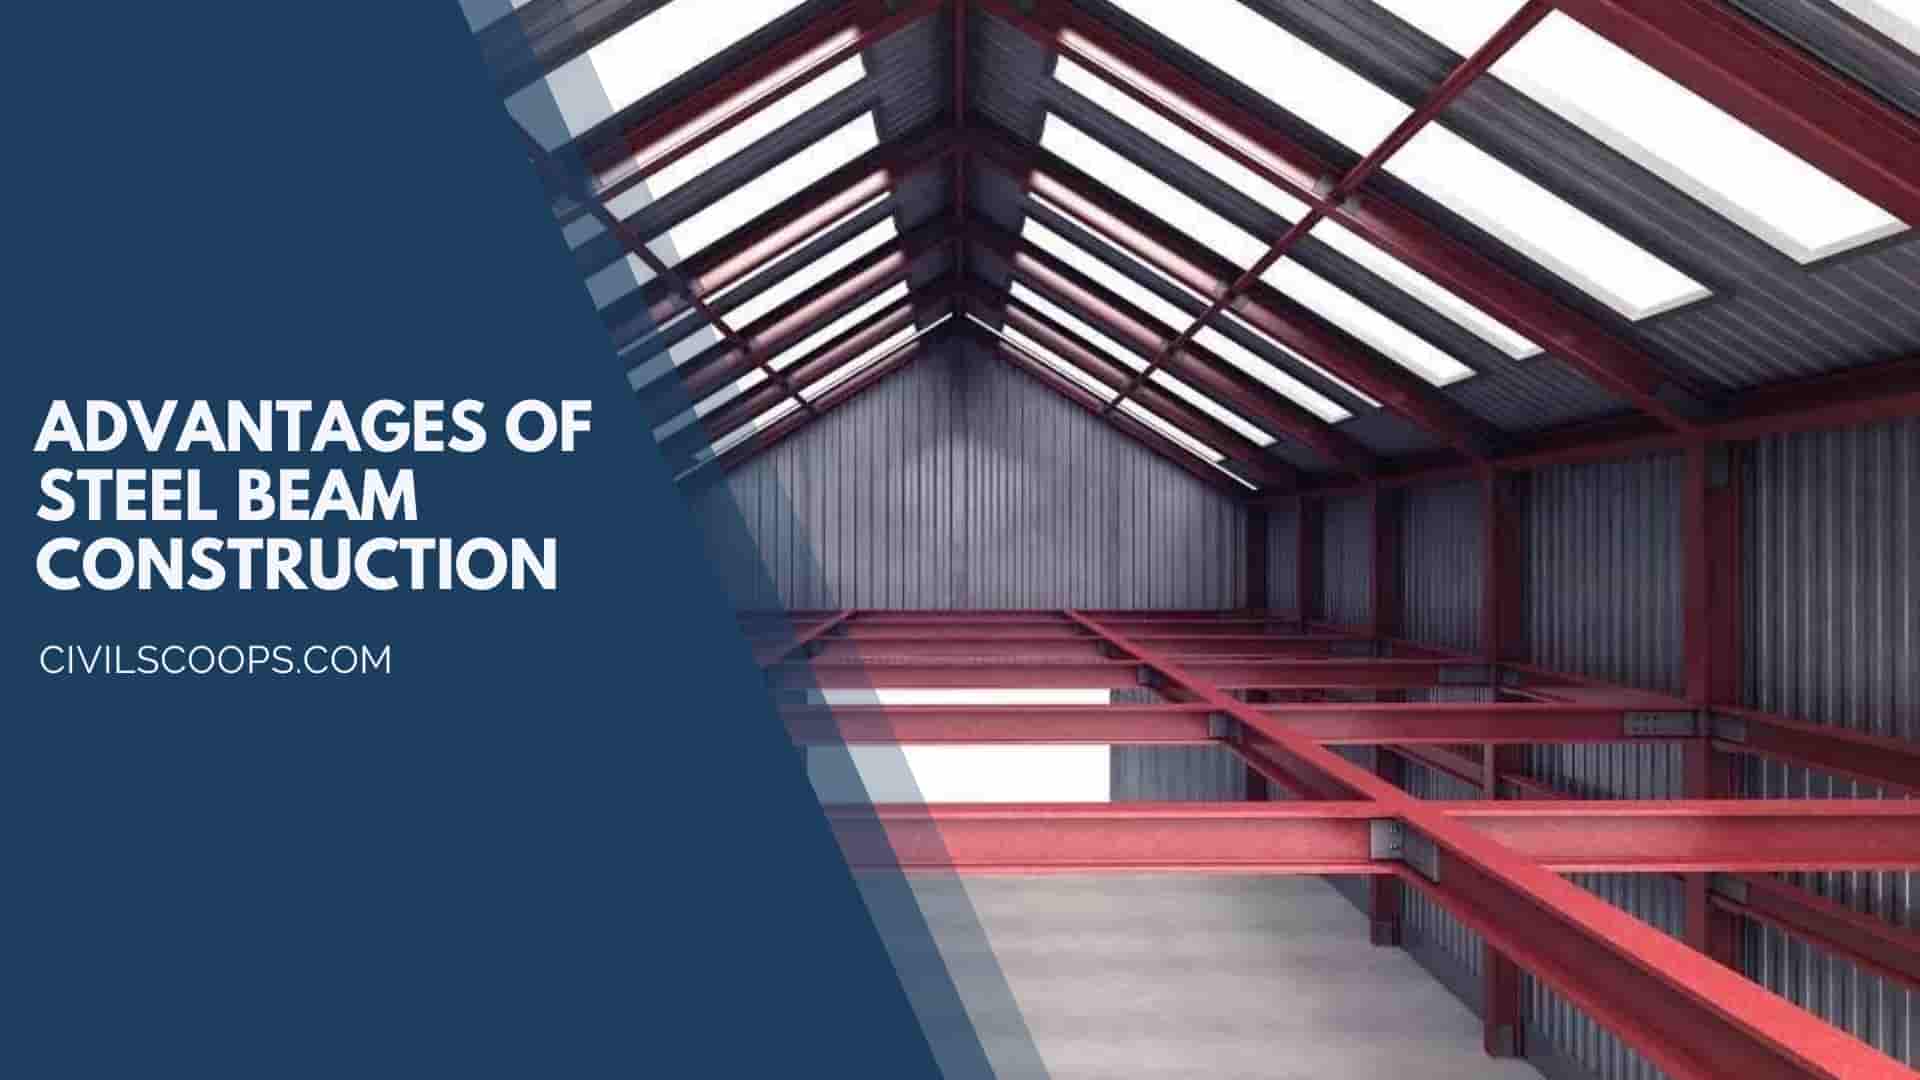 Advantages of Steel Beam Construction